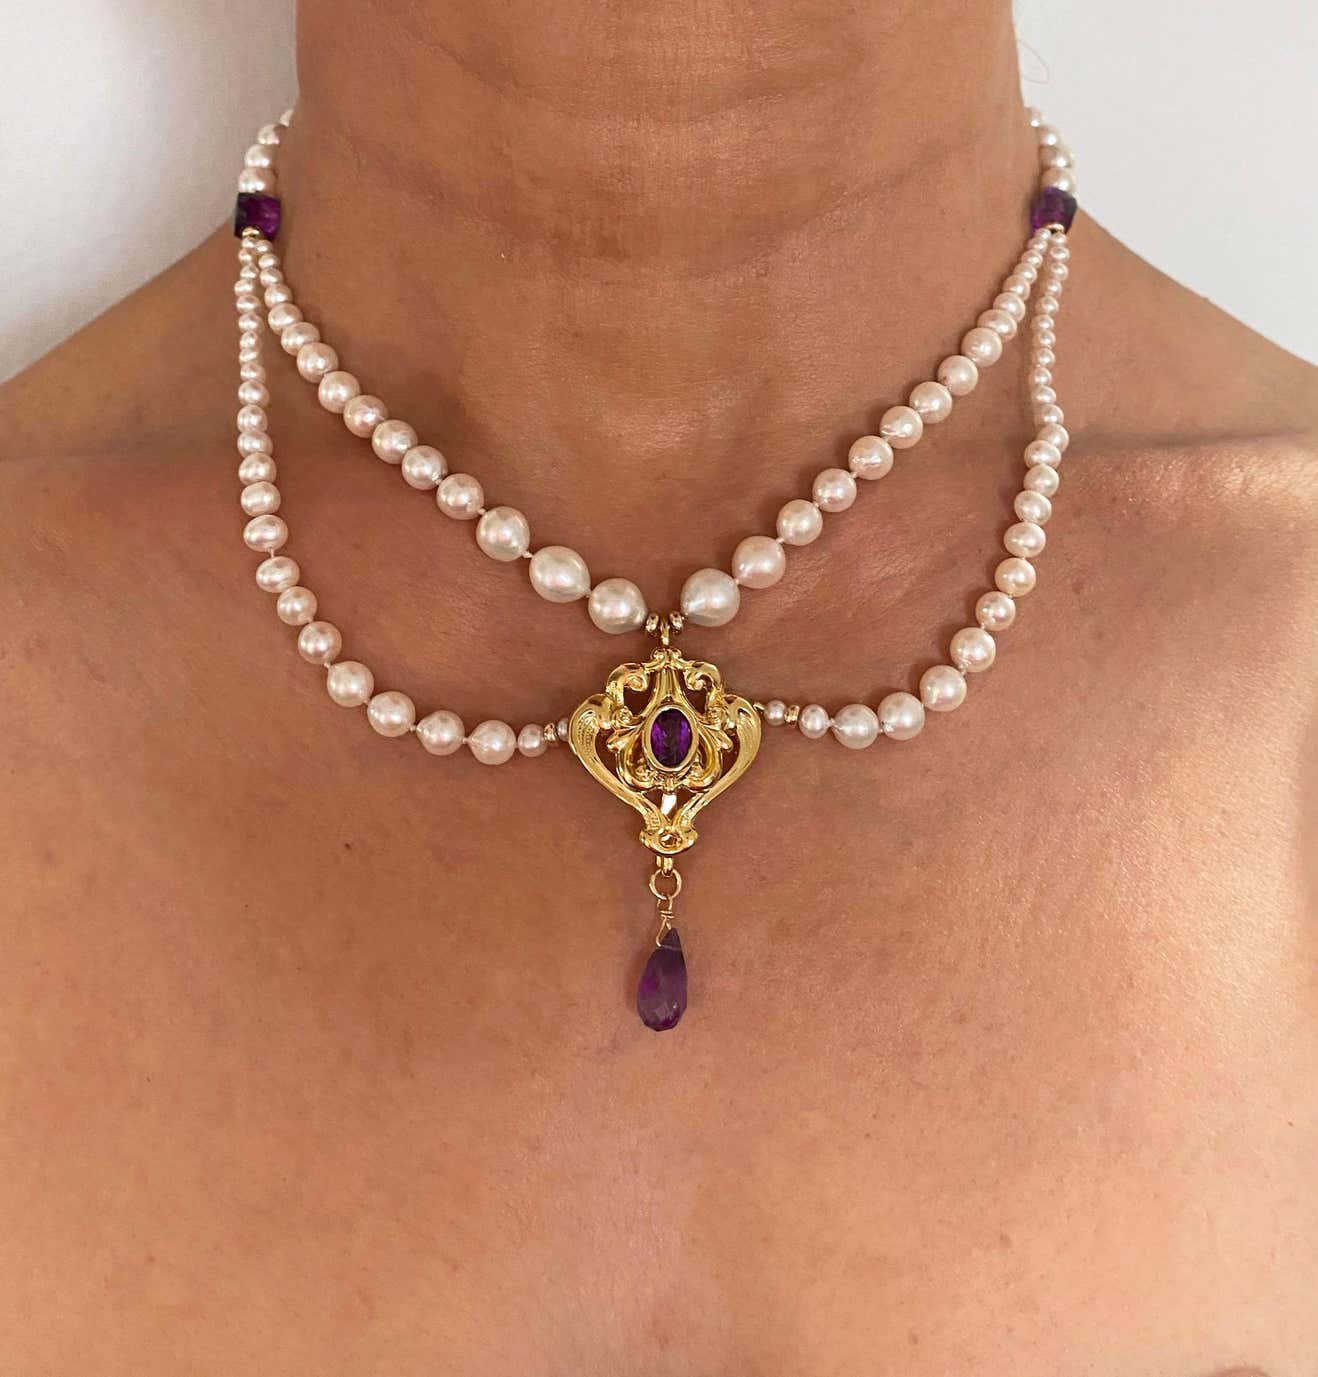 Graduated Pearl and Amethyst Necklace with 14K Yellow Gold Plated Centerpiece